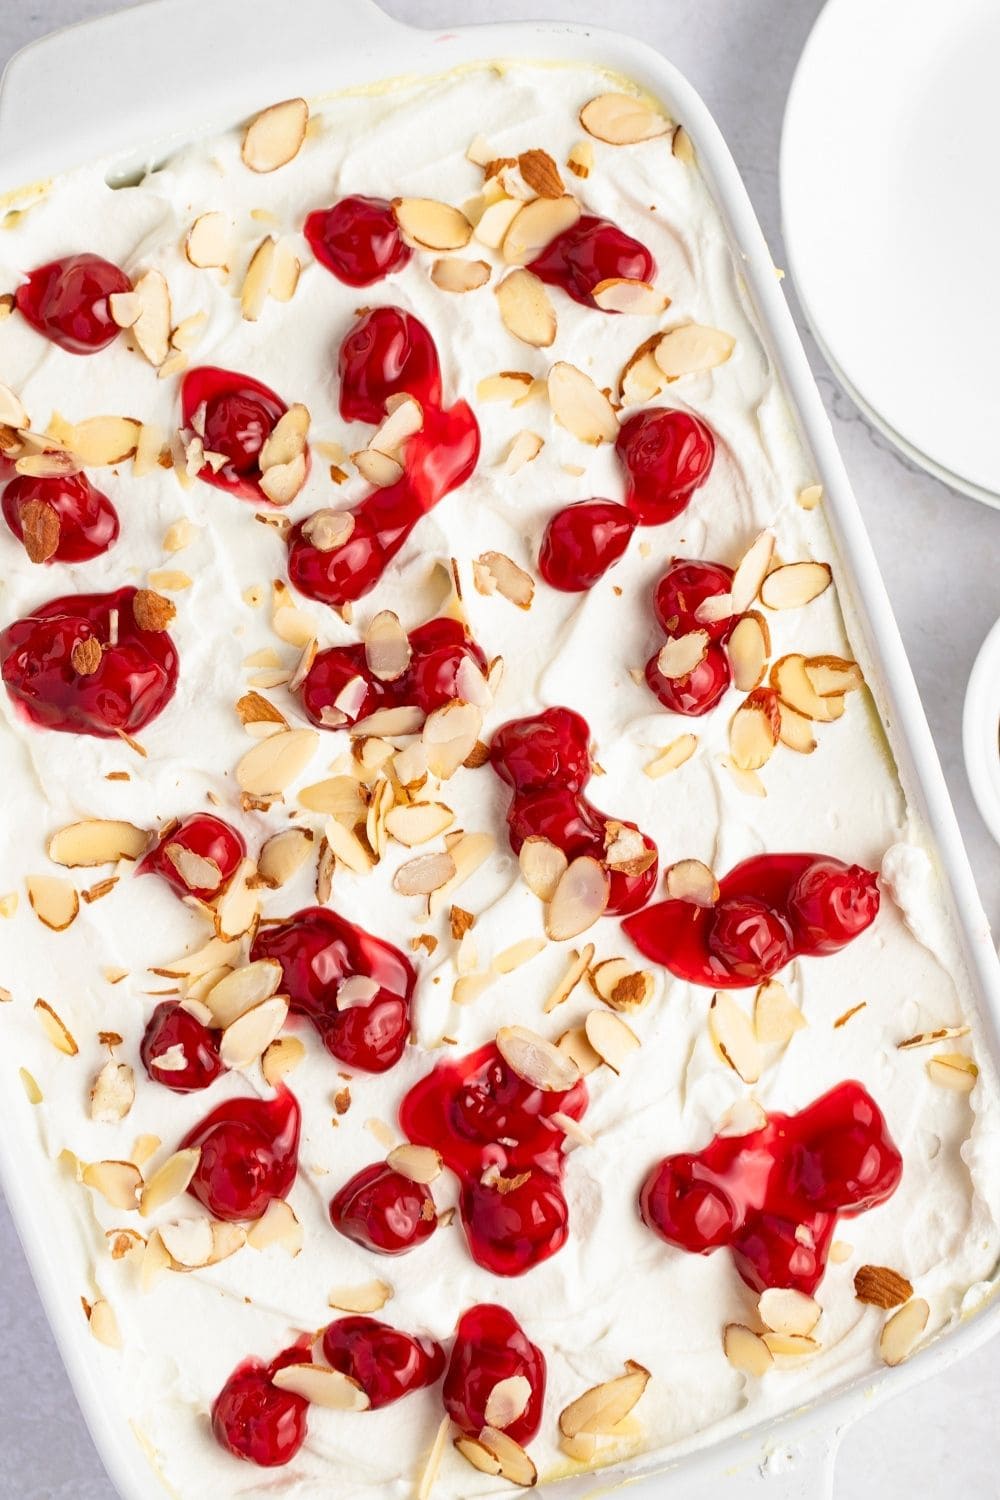 Heaven On Earth Cake with Whipped Cream, Cherry Pie Filling, and Almonds in a Casserole Dish